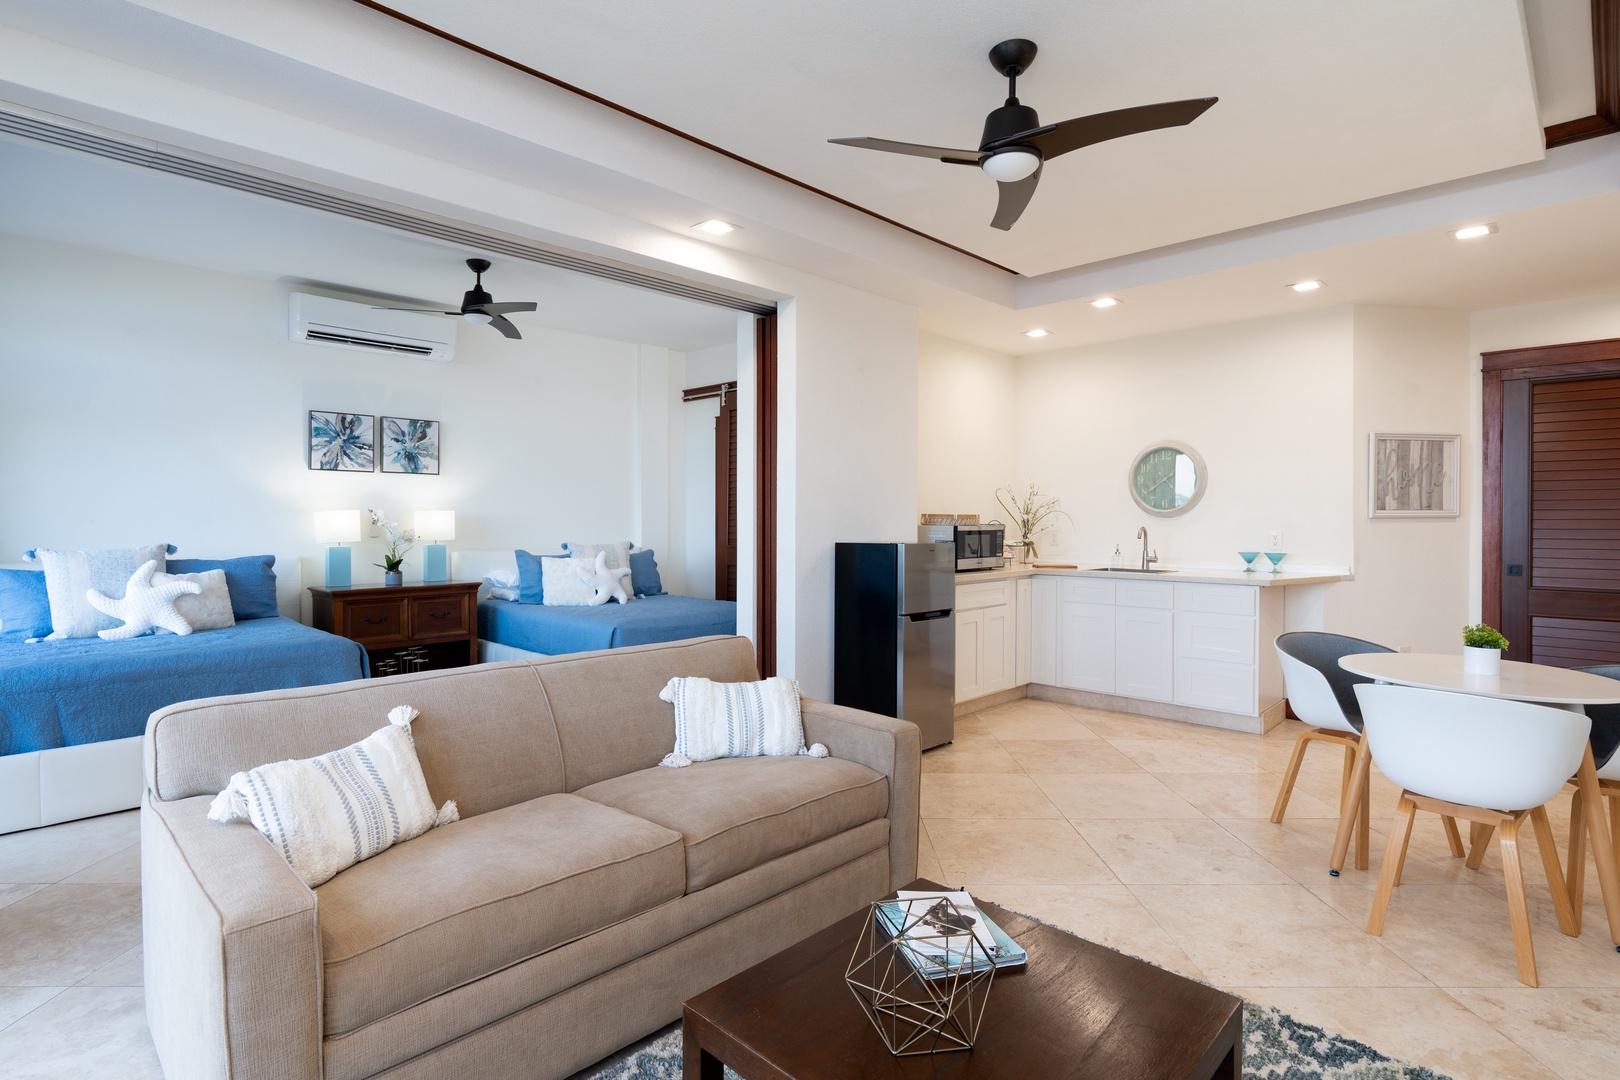 Honolulu Vacation Rentals, Wailupe Seaside - Enjoy a sitting area and kitchenette in the secondary suite.